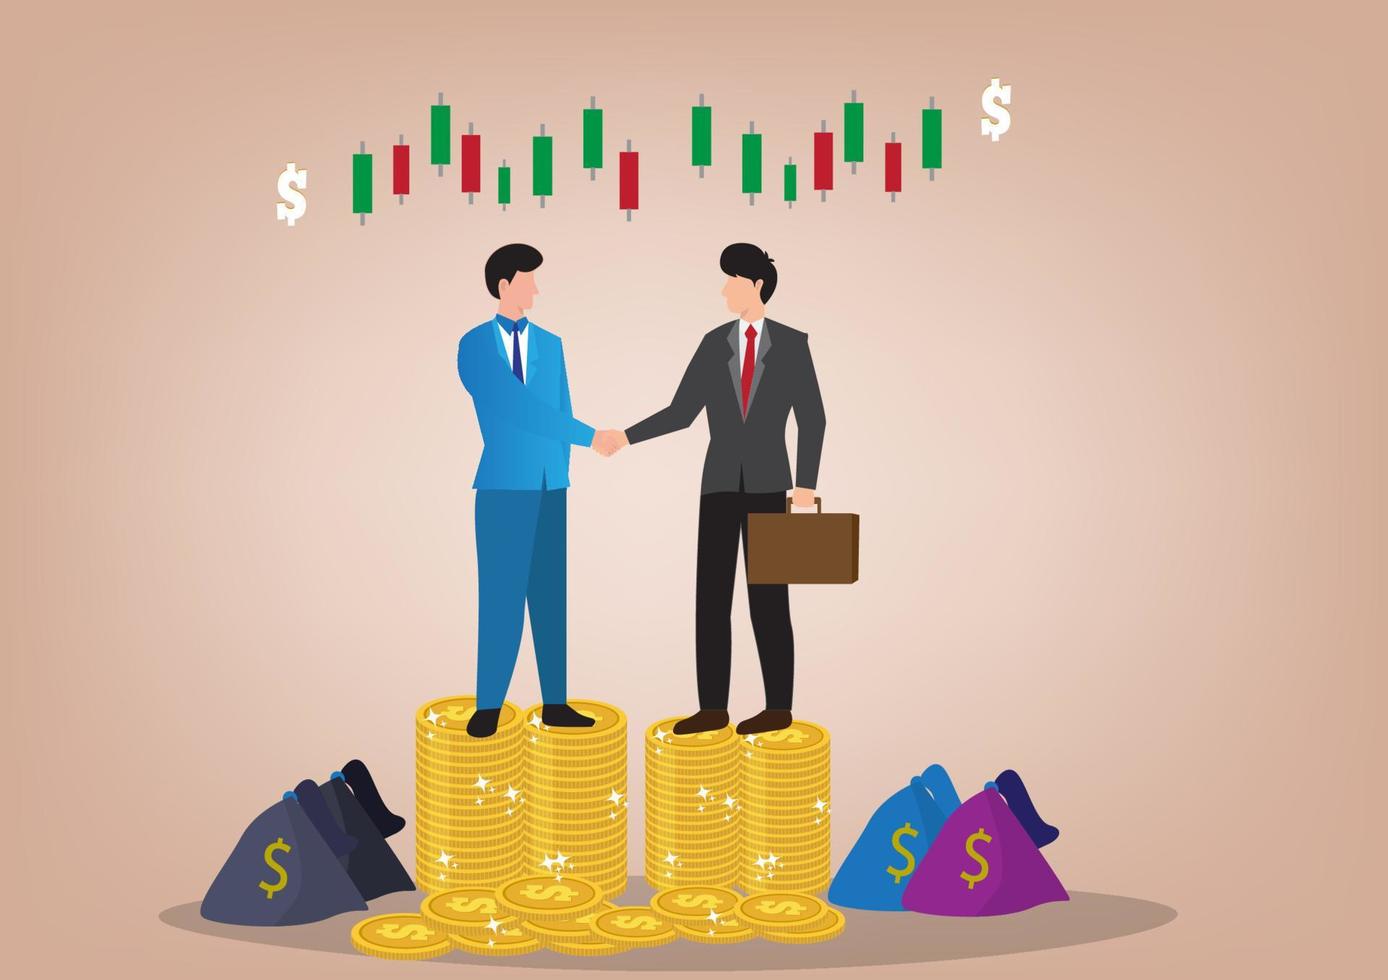 vector illustration of two business people standing hand in hand on a pile of coins business investment ideas